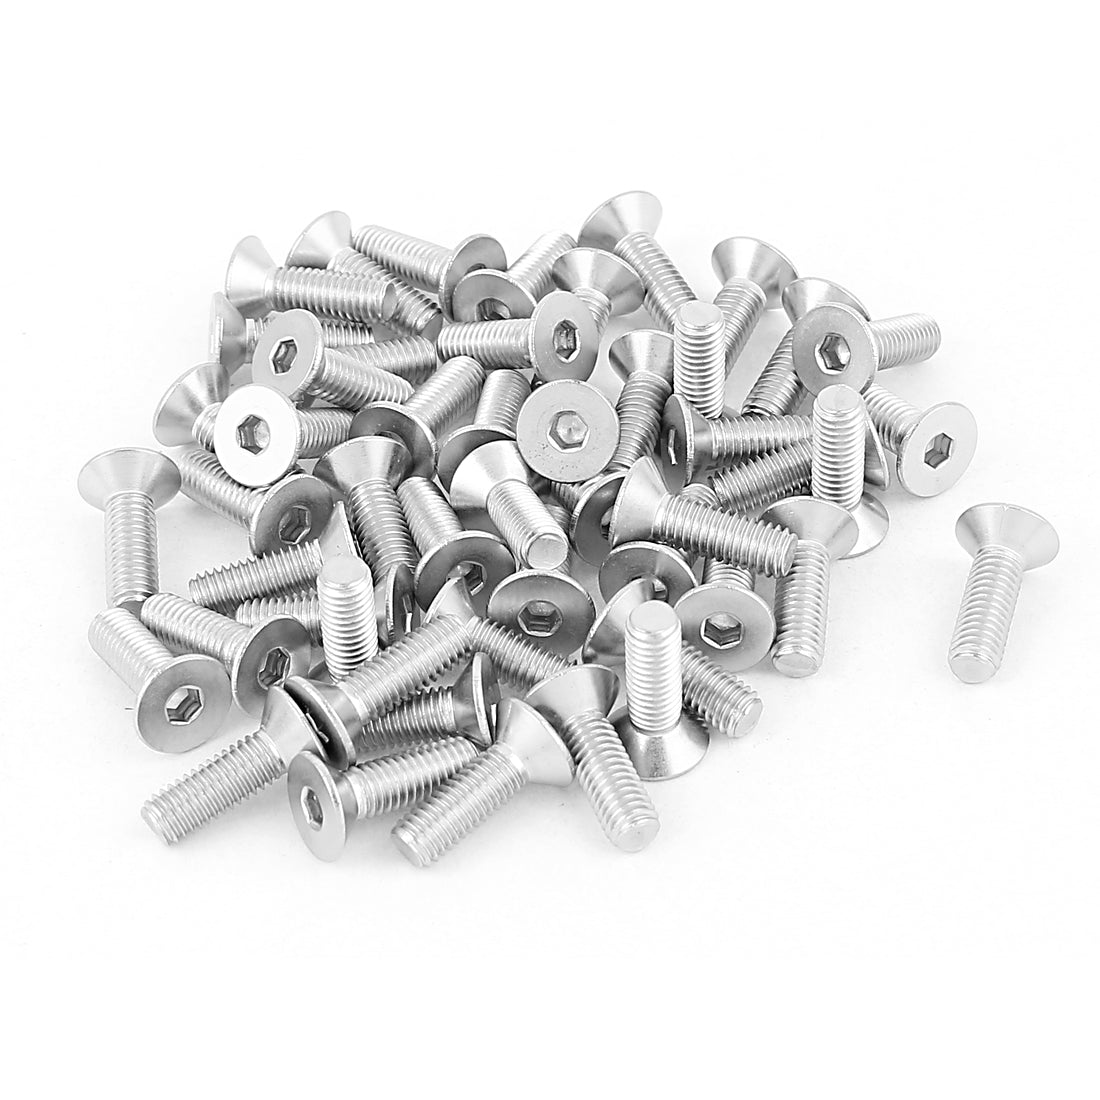 uxcell Uxcell M5x16mm Stainless Steel Hex Socket Flat Head Countersunk Bolts Screw 50Pcs